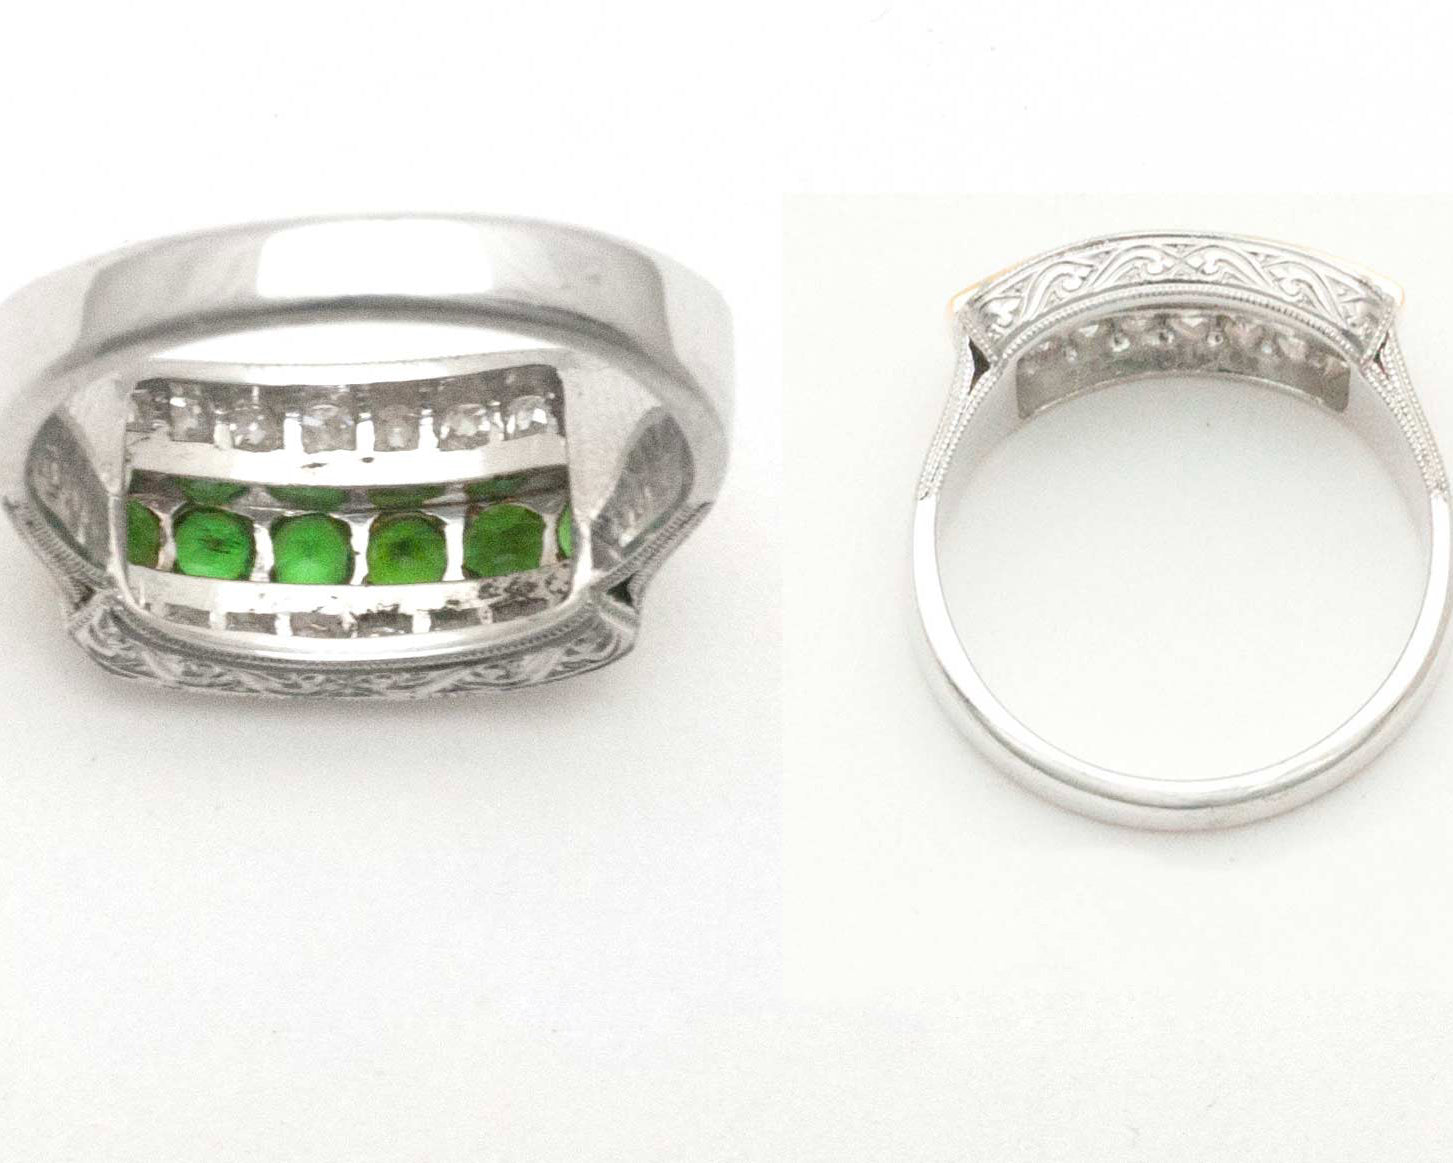 Green tsavorite antique anniversary band with diamond accents.